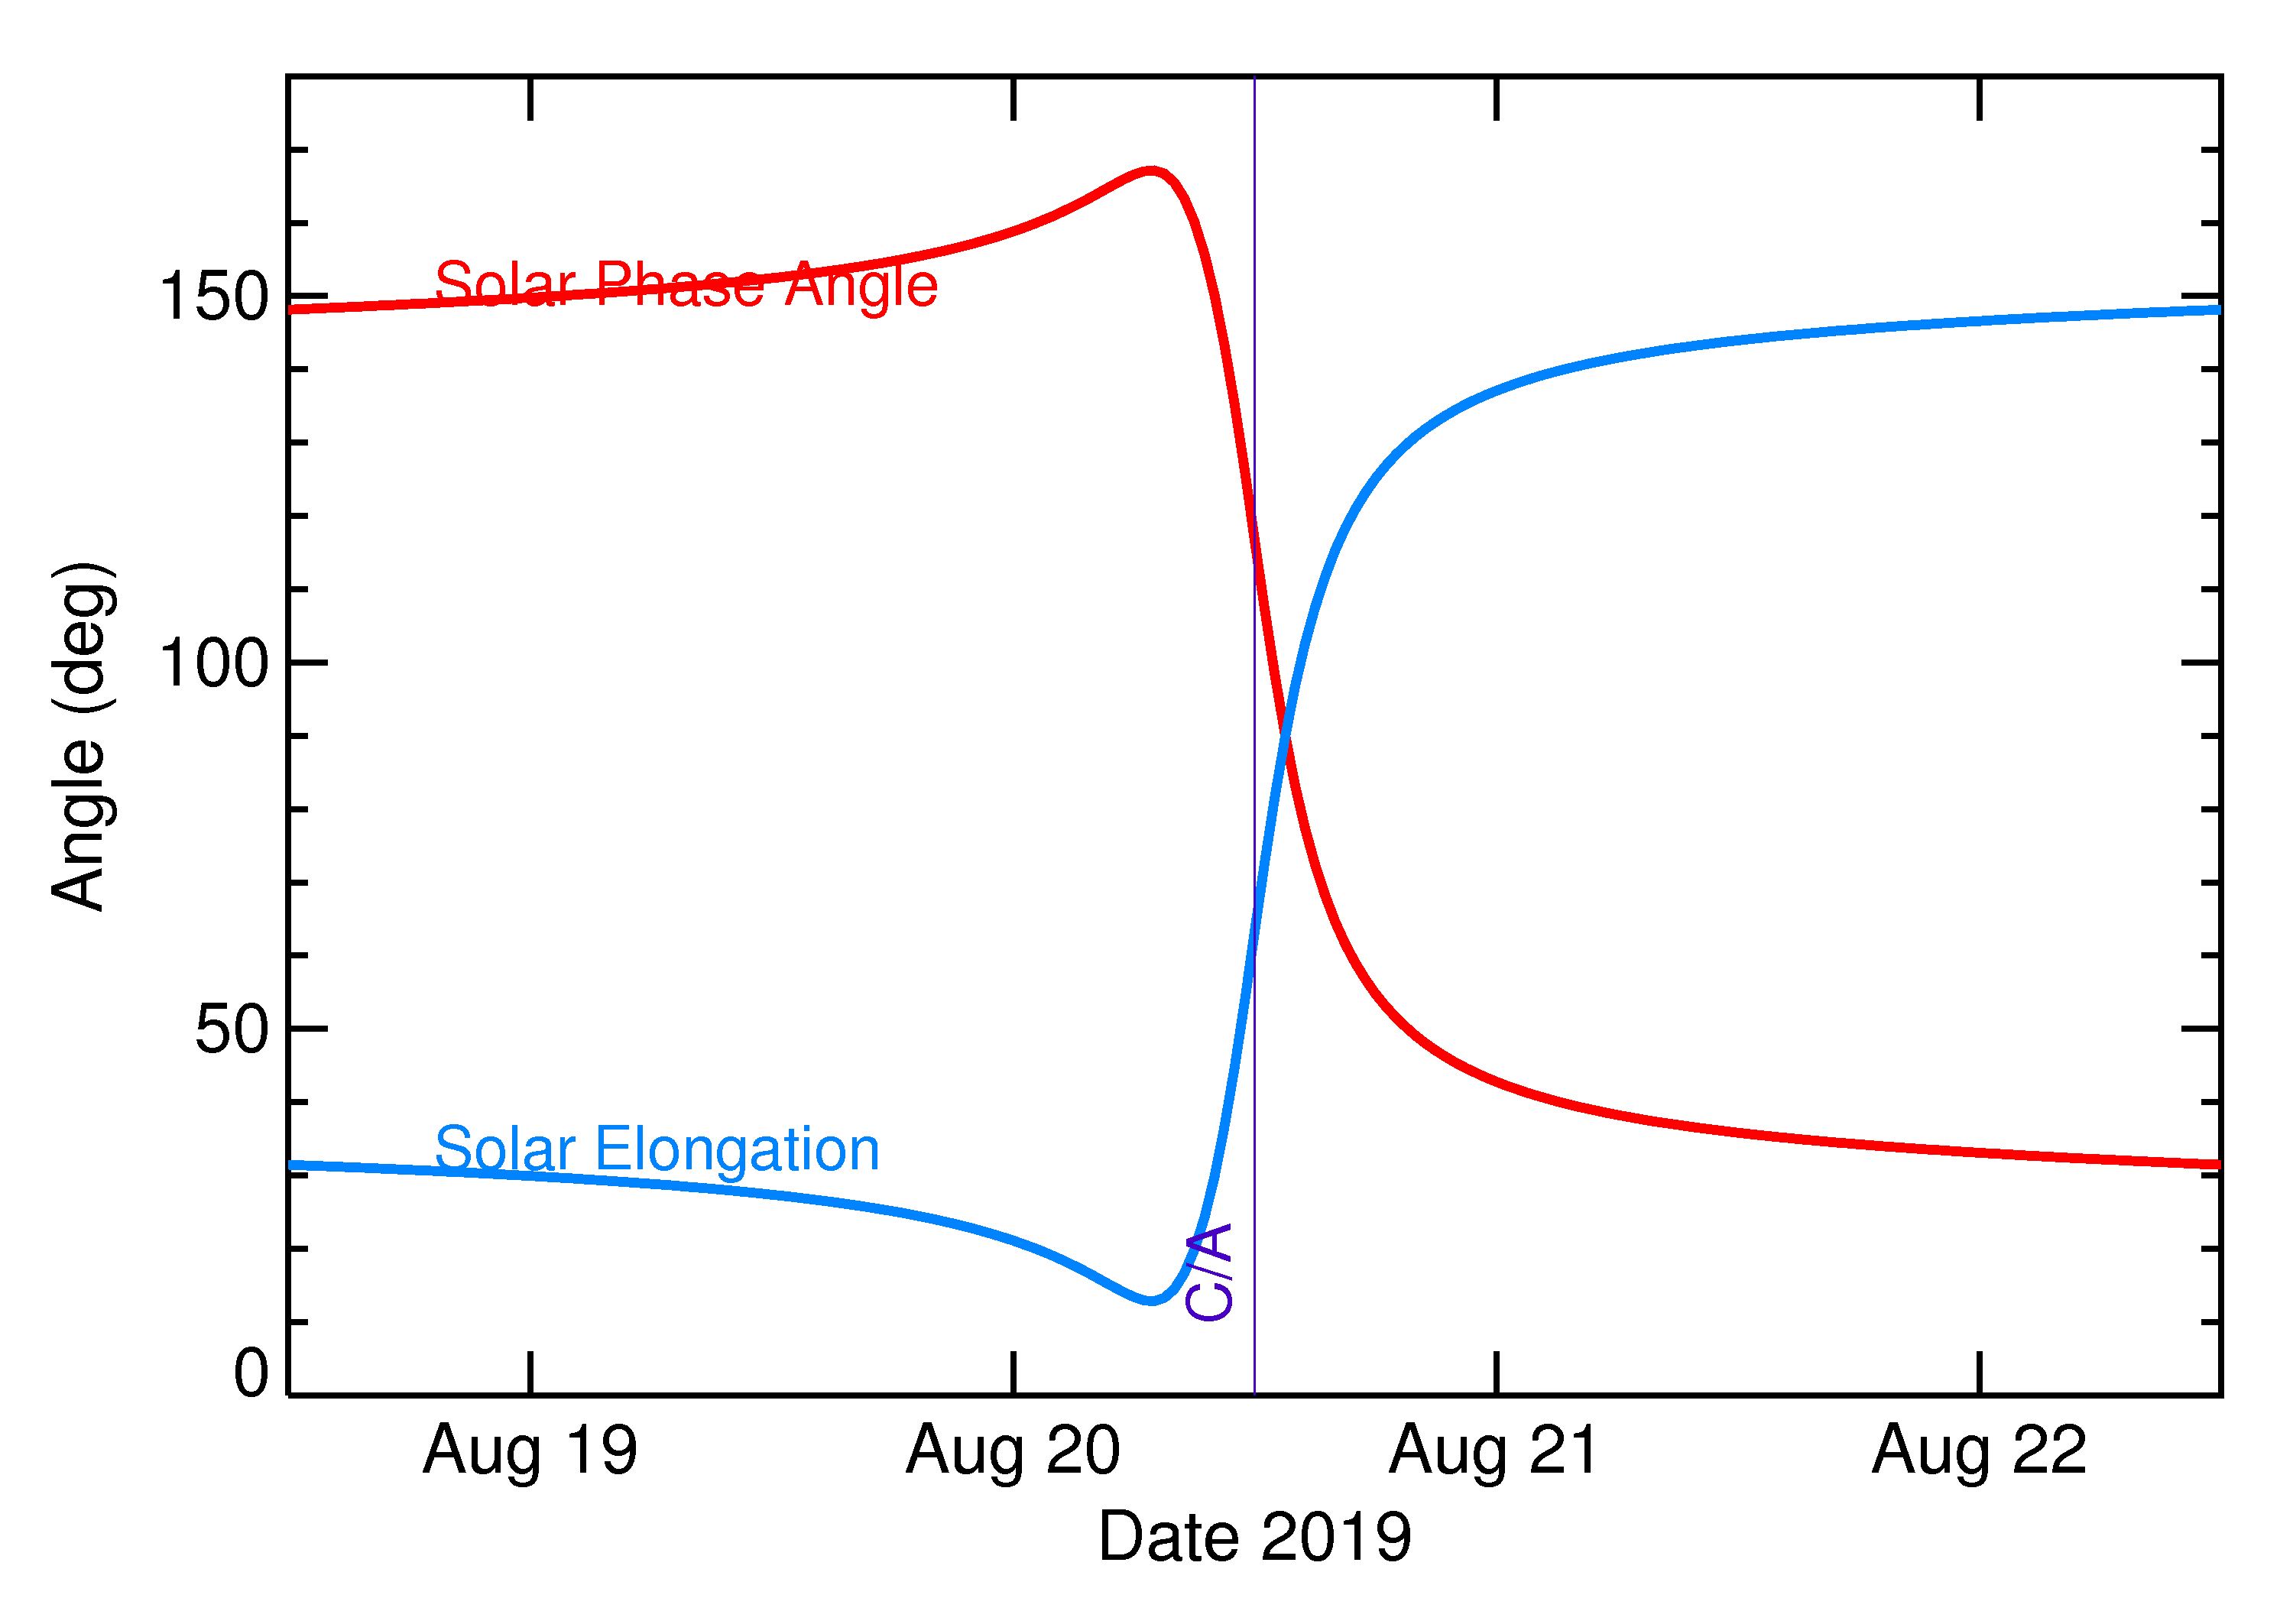 Solar Elongation and Solar Phase Angle of 2019 QB1 in the days around closest approach